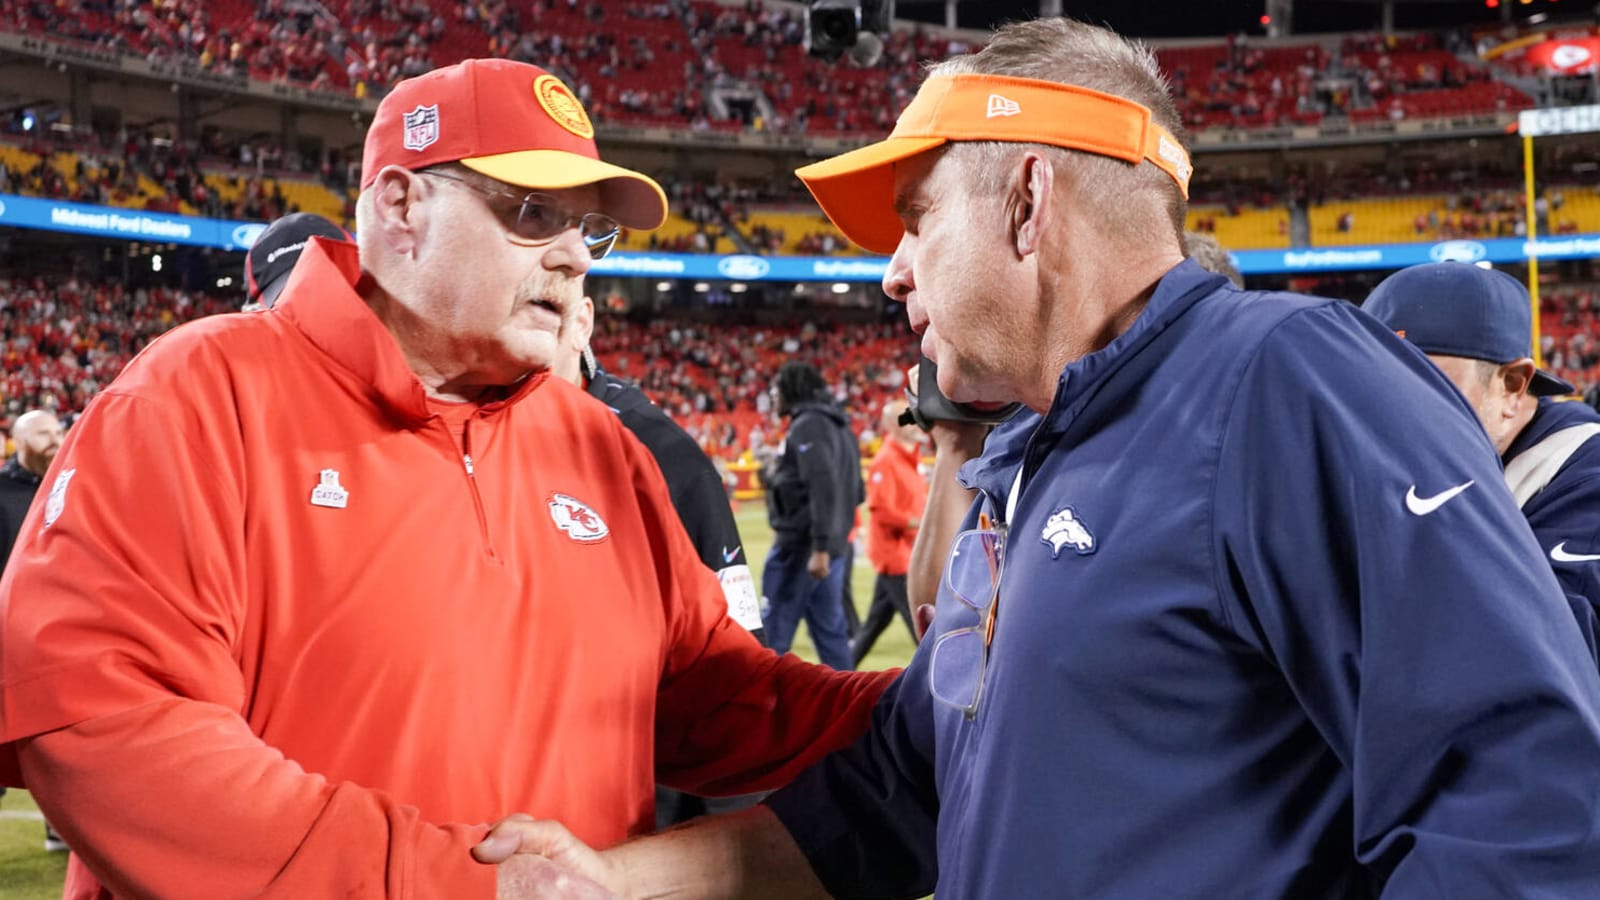 Snow could play significant role in Chiefs-Broncos game